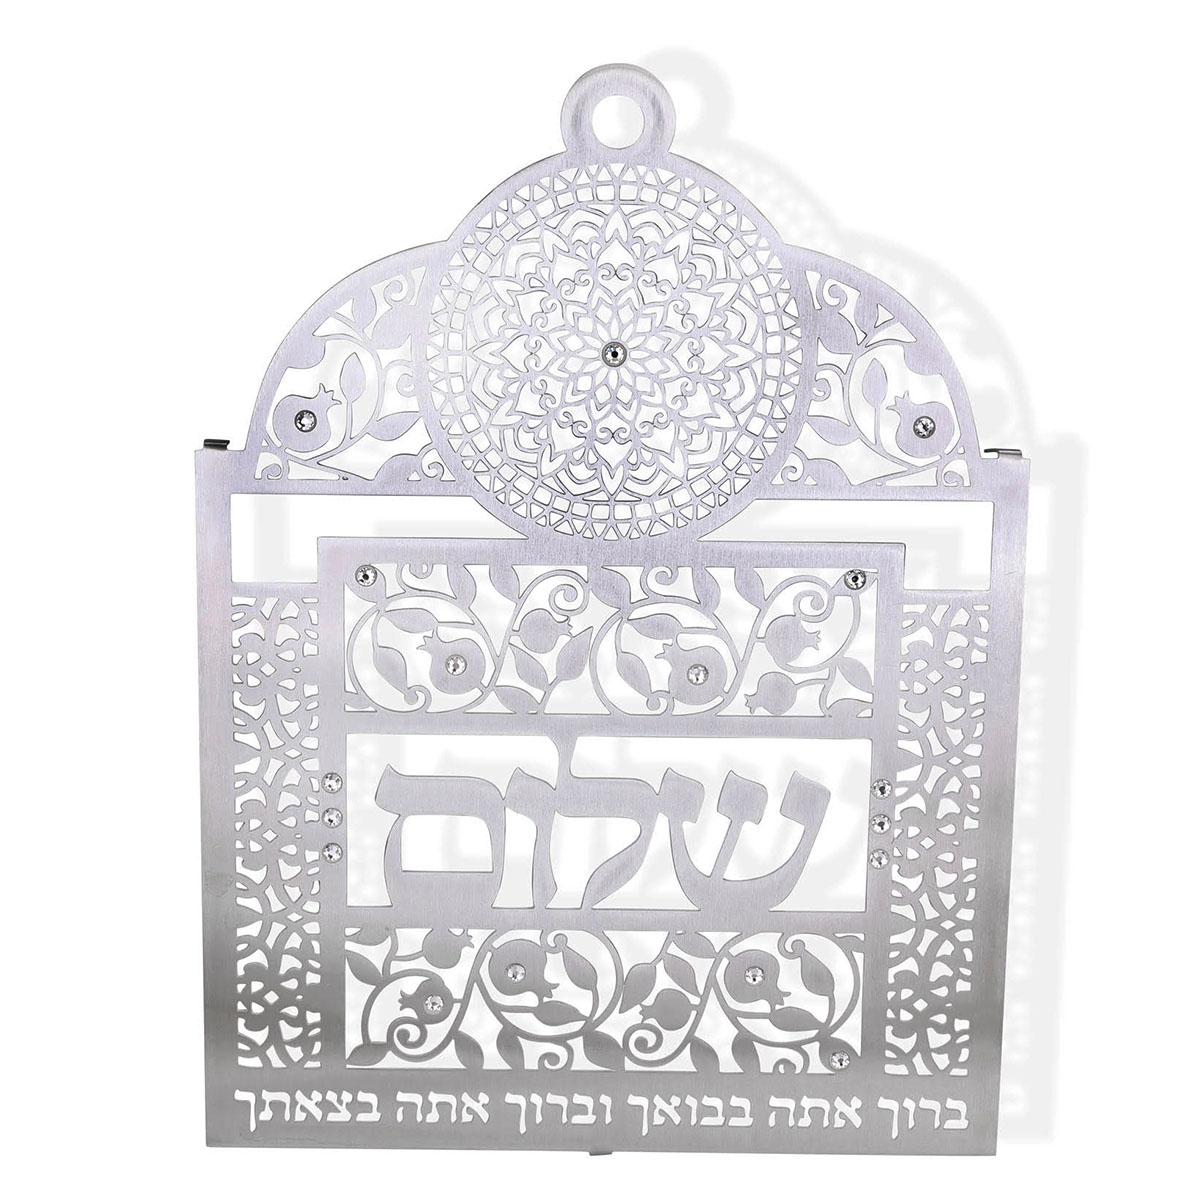 Dorit Judaica Stainless Steel Mandala and Pomegranates Cutout Blessing Wall Hanging with Shalom - 1